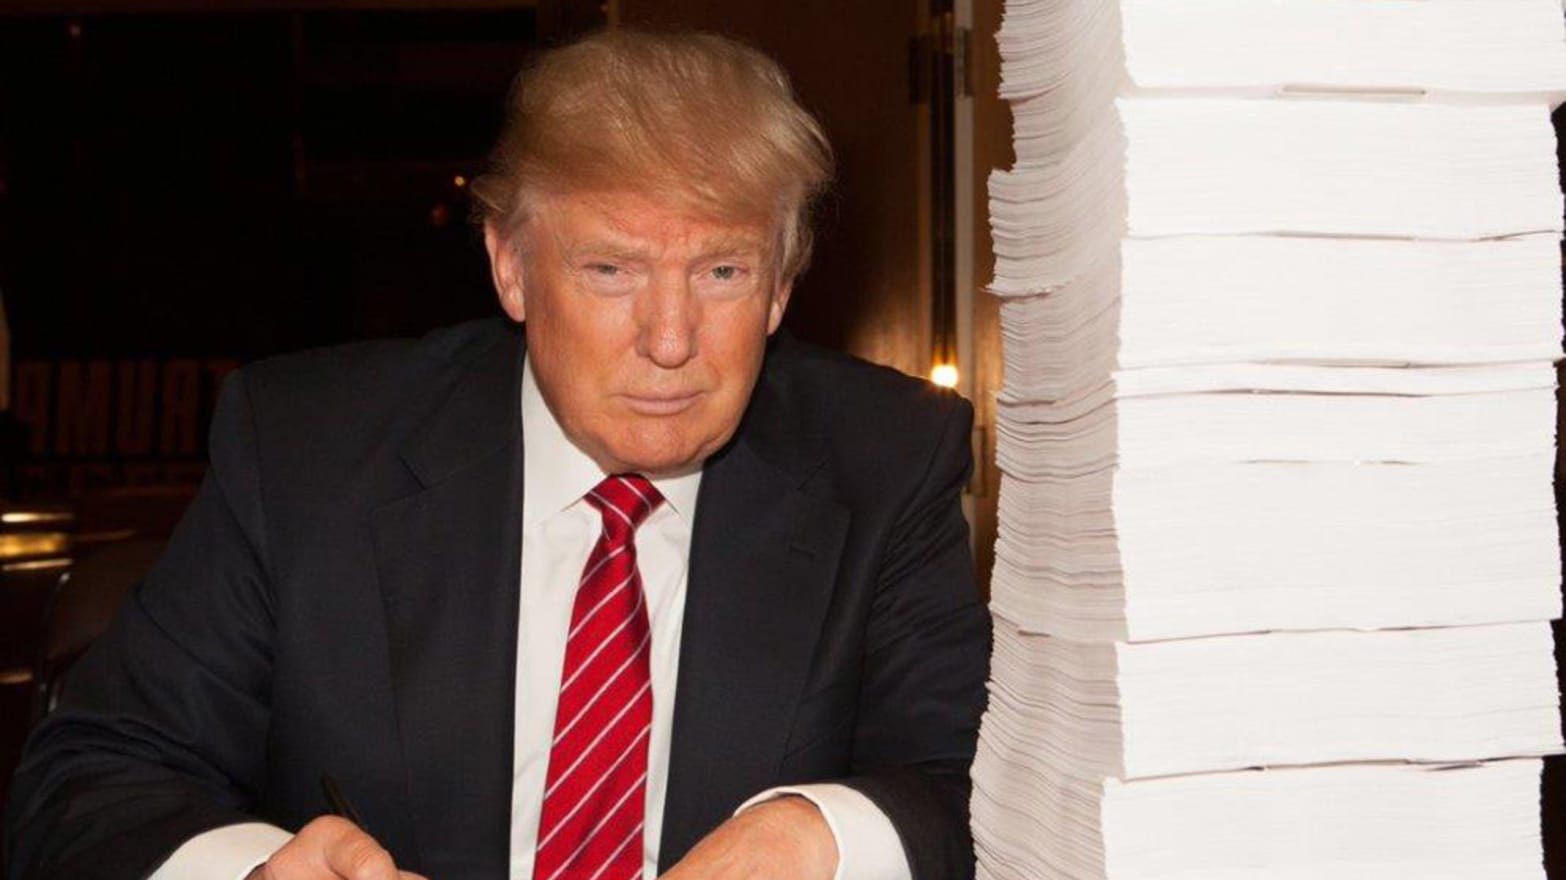 More Lawlessness: DOJ Says IRS Must Turn Over President Donald Trump’s Tax Returns to Democrats in Congress